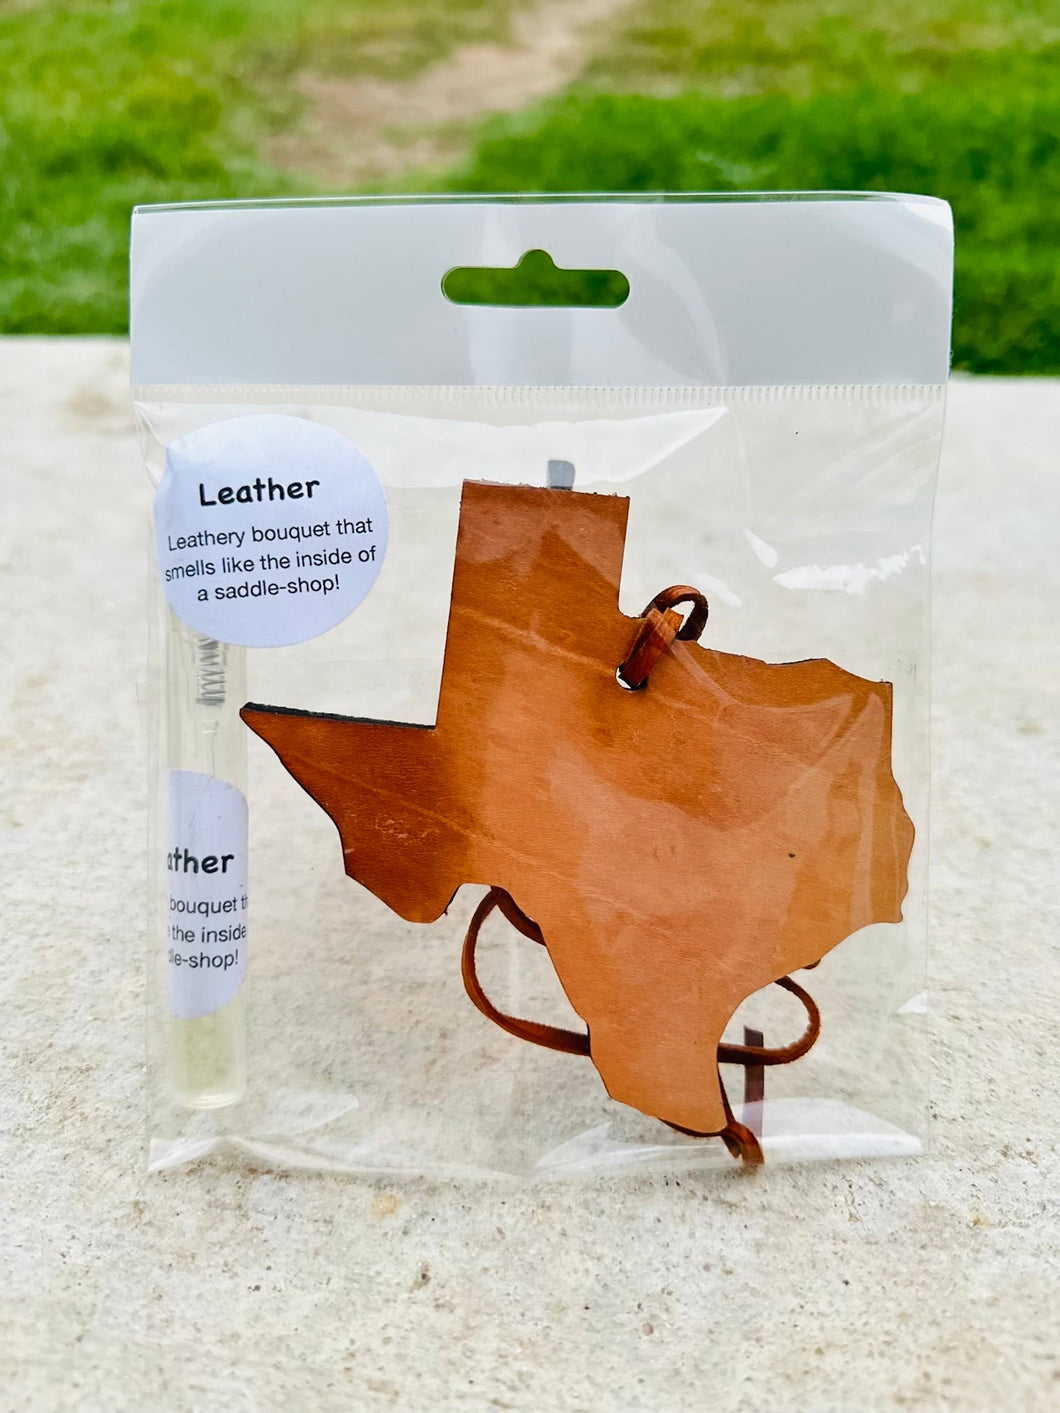 Leather Texas Air Freshener with Spray